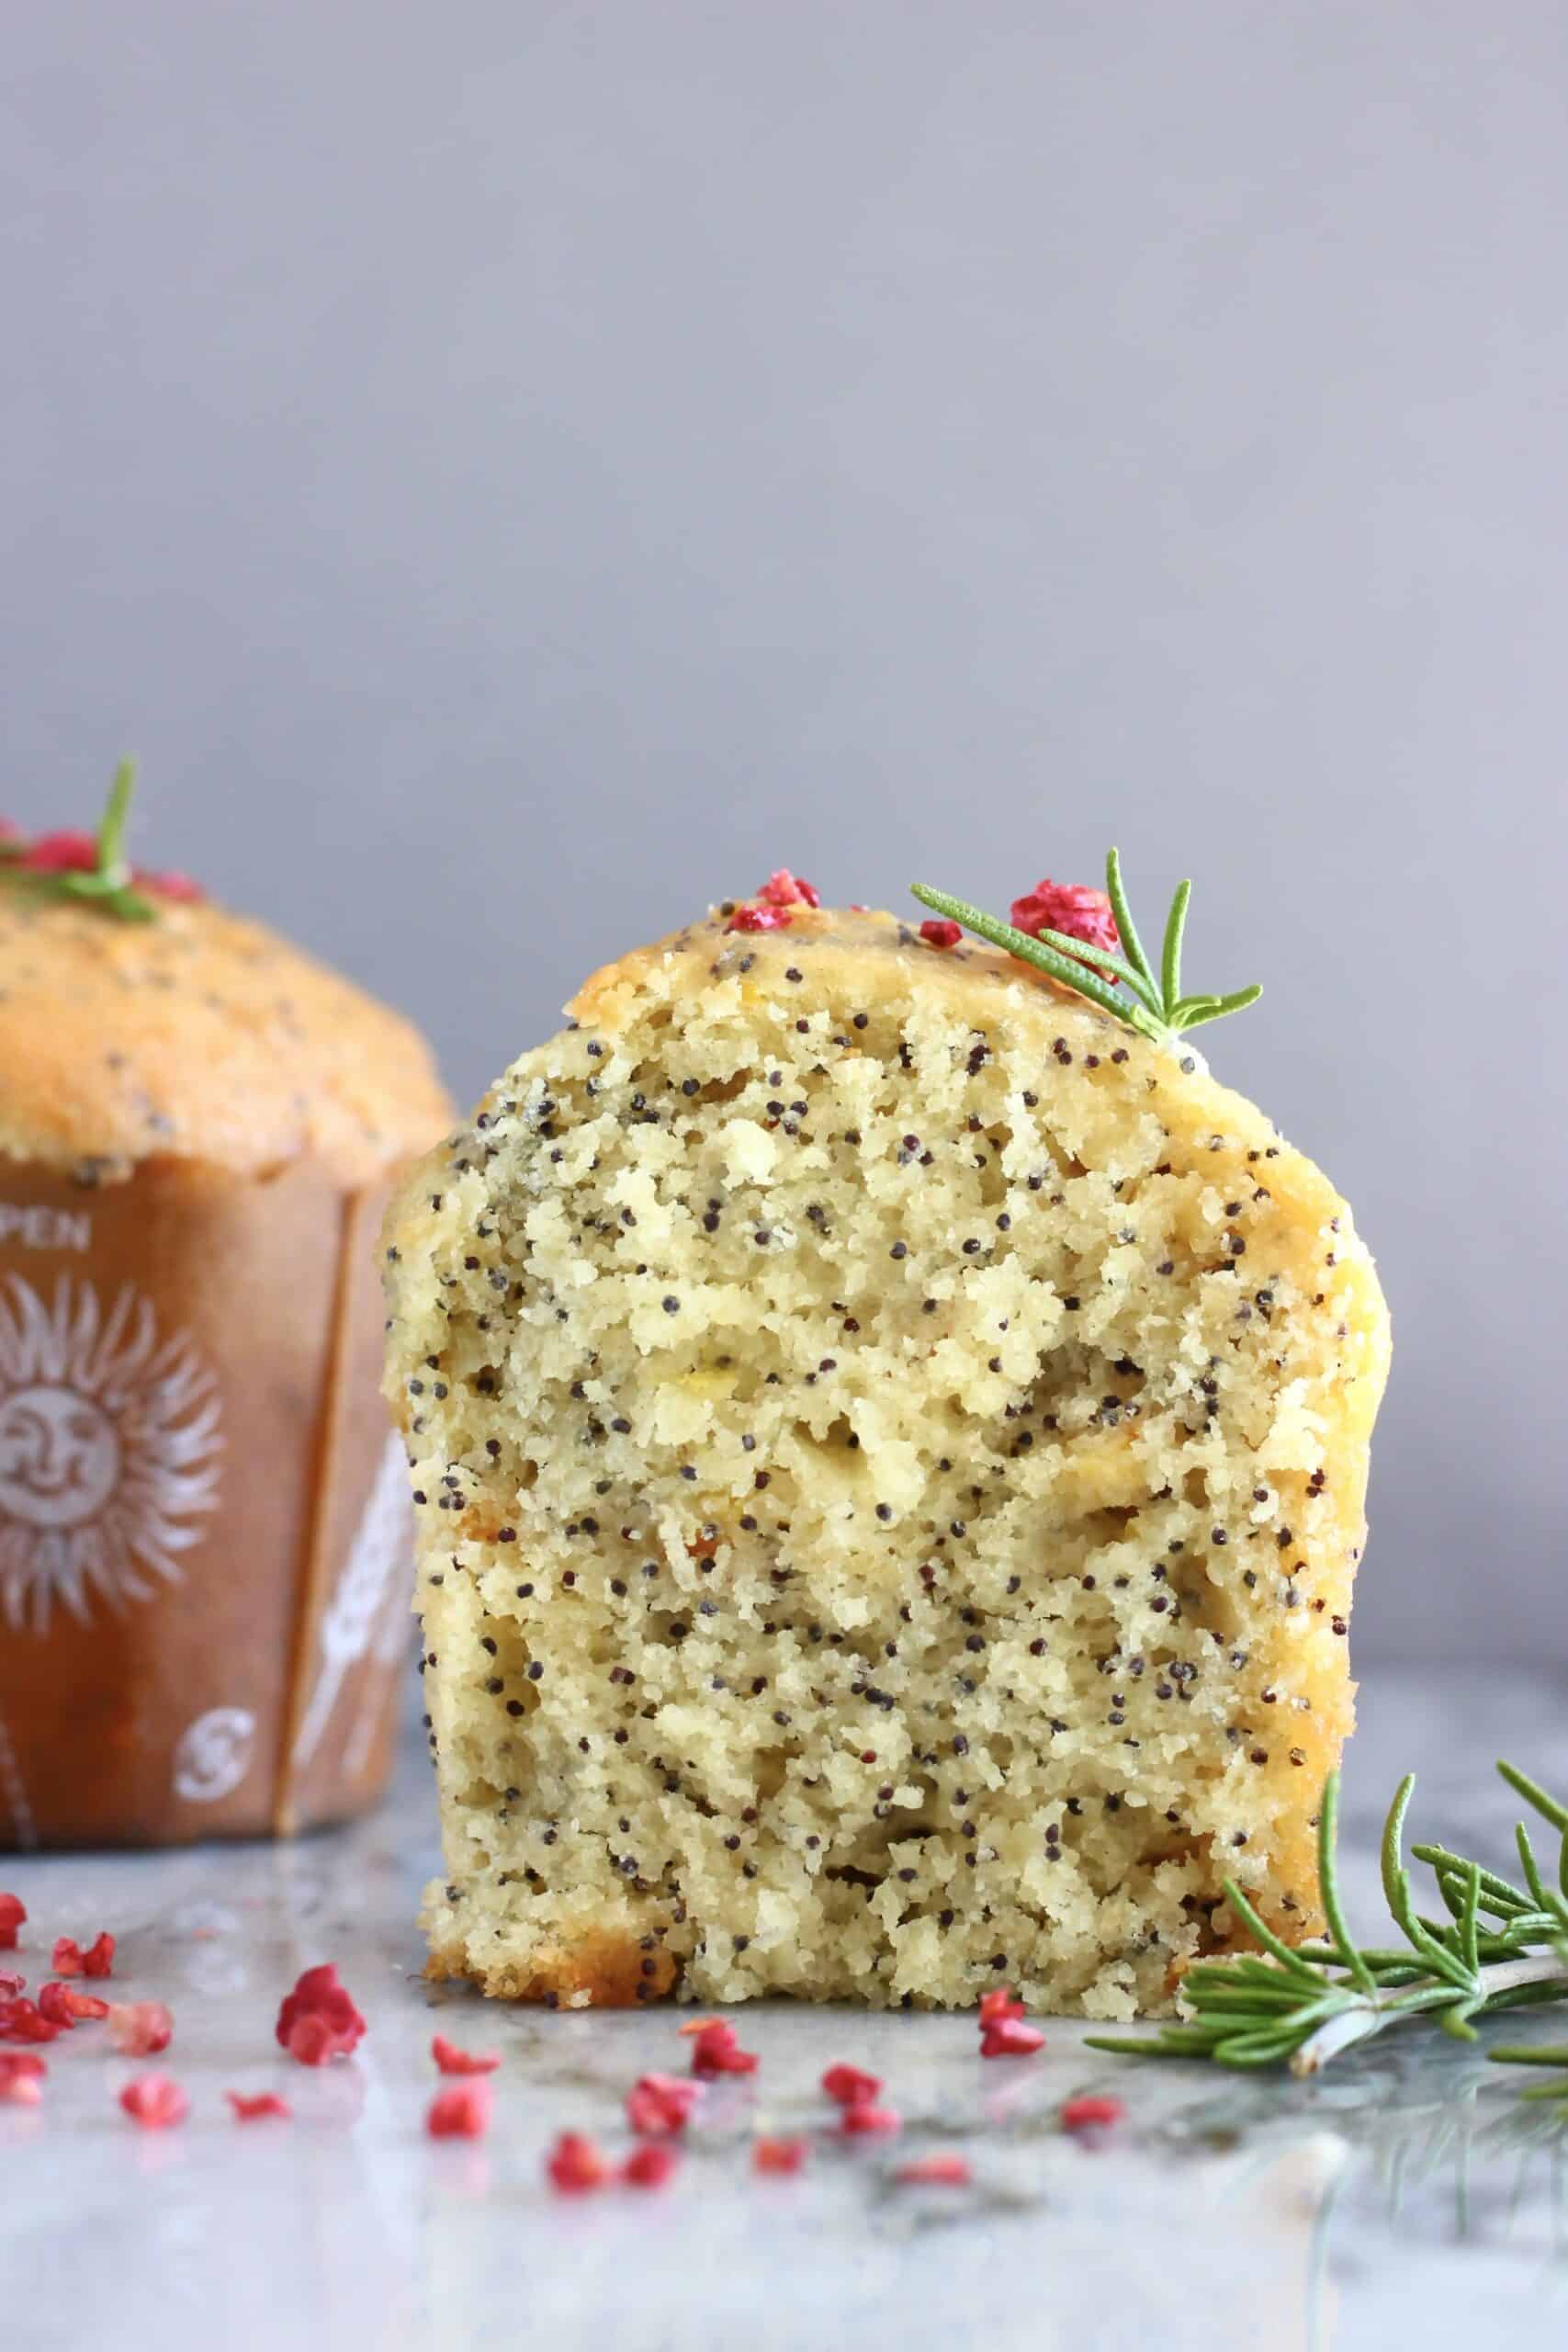 A halved gluten-free vegan orange poppy seed muffin with a whole muffin in the background